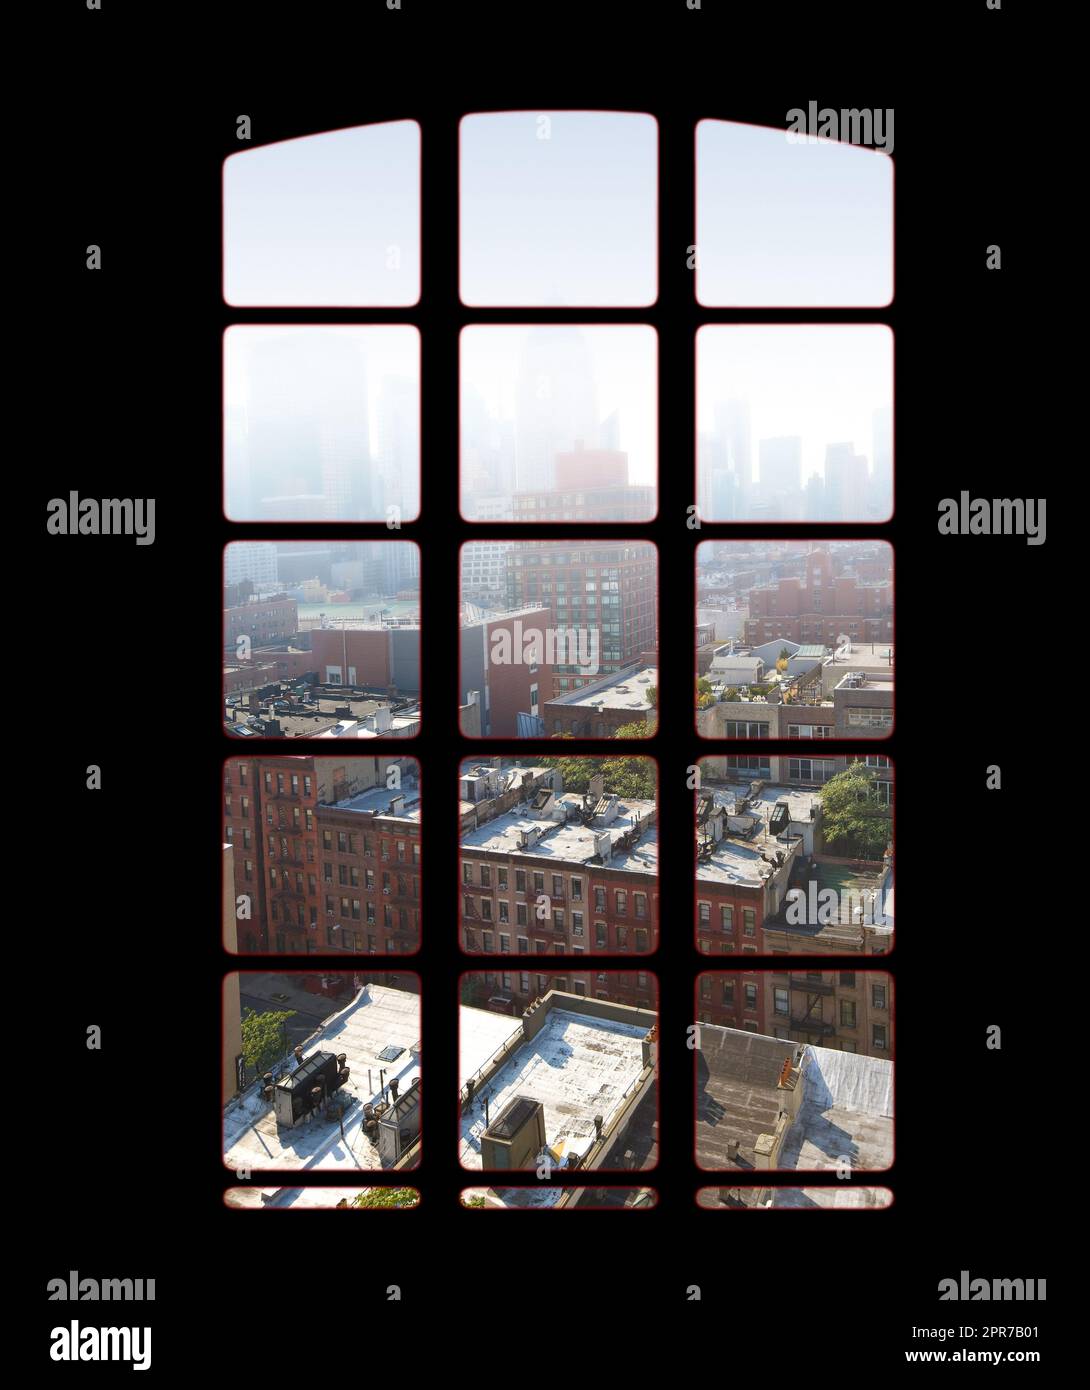 City skyline from an apartment or office window on a bright sunny day. View from inside an empty dark penthouse or hotel room with square glass windows overlooking downtown residential buildings Stock Photo